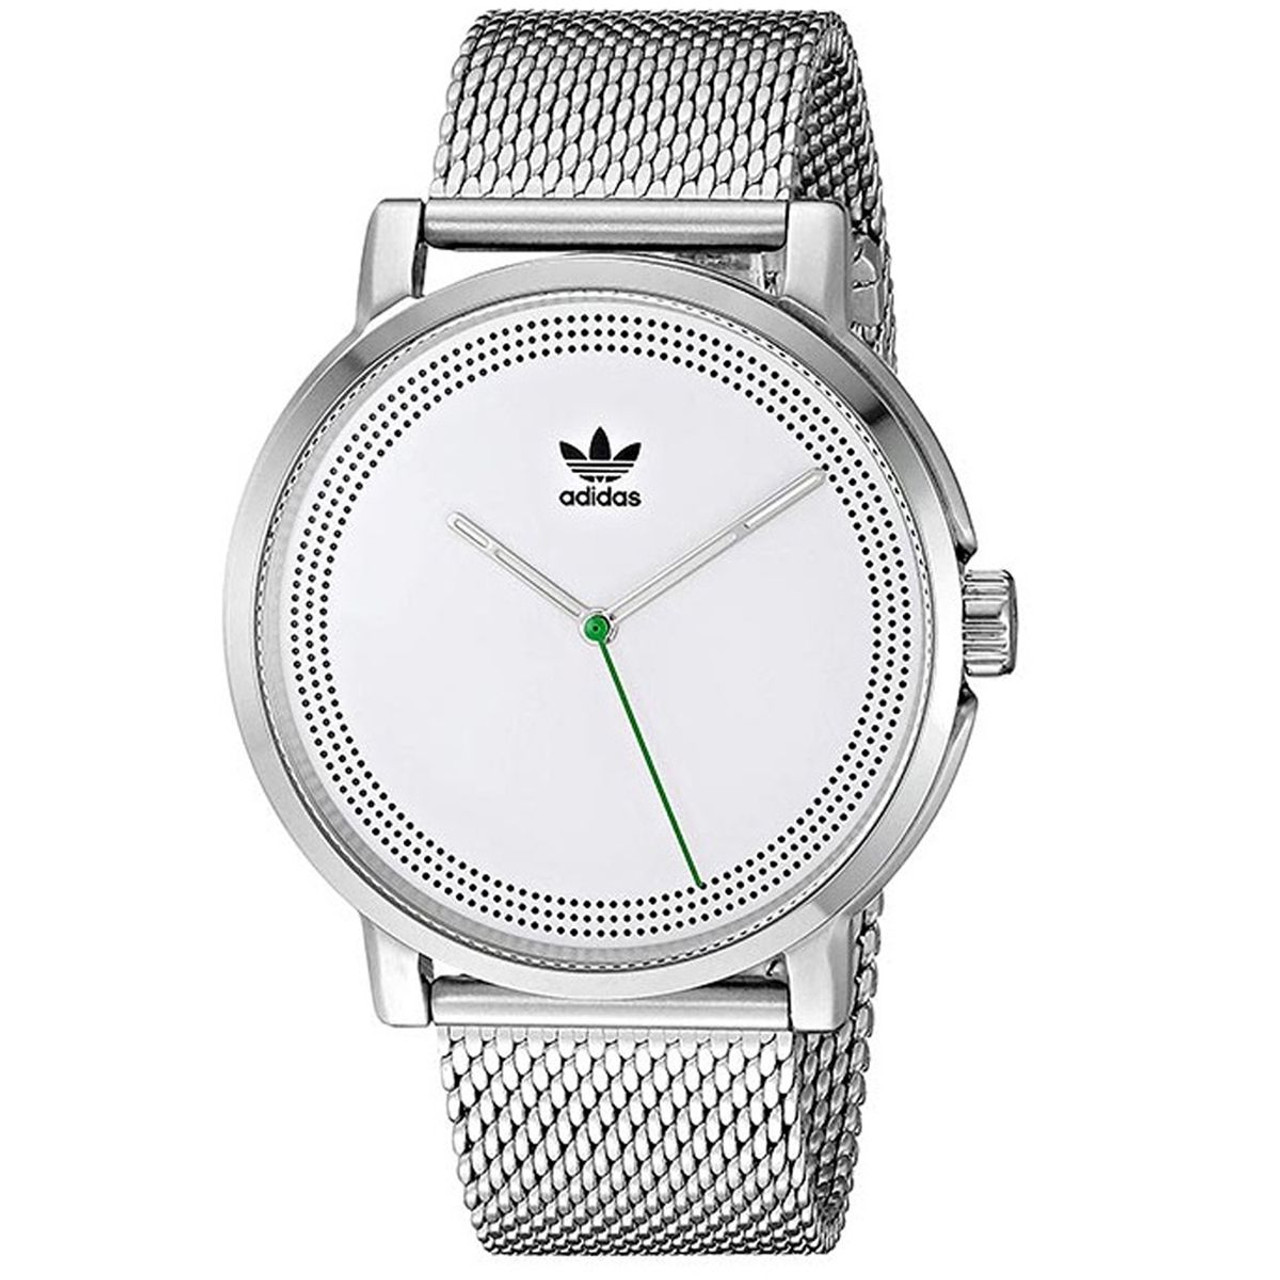 Adidas Men's District M2 White Dial Watch product image